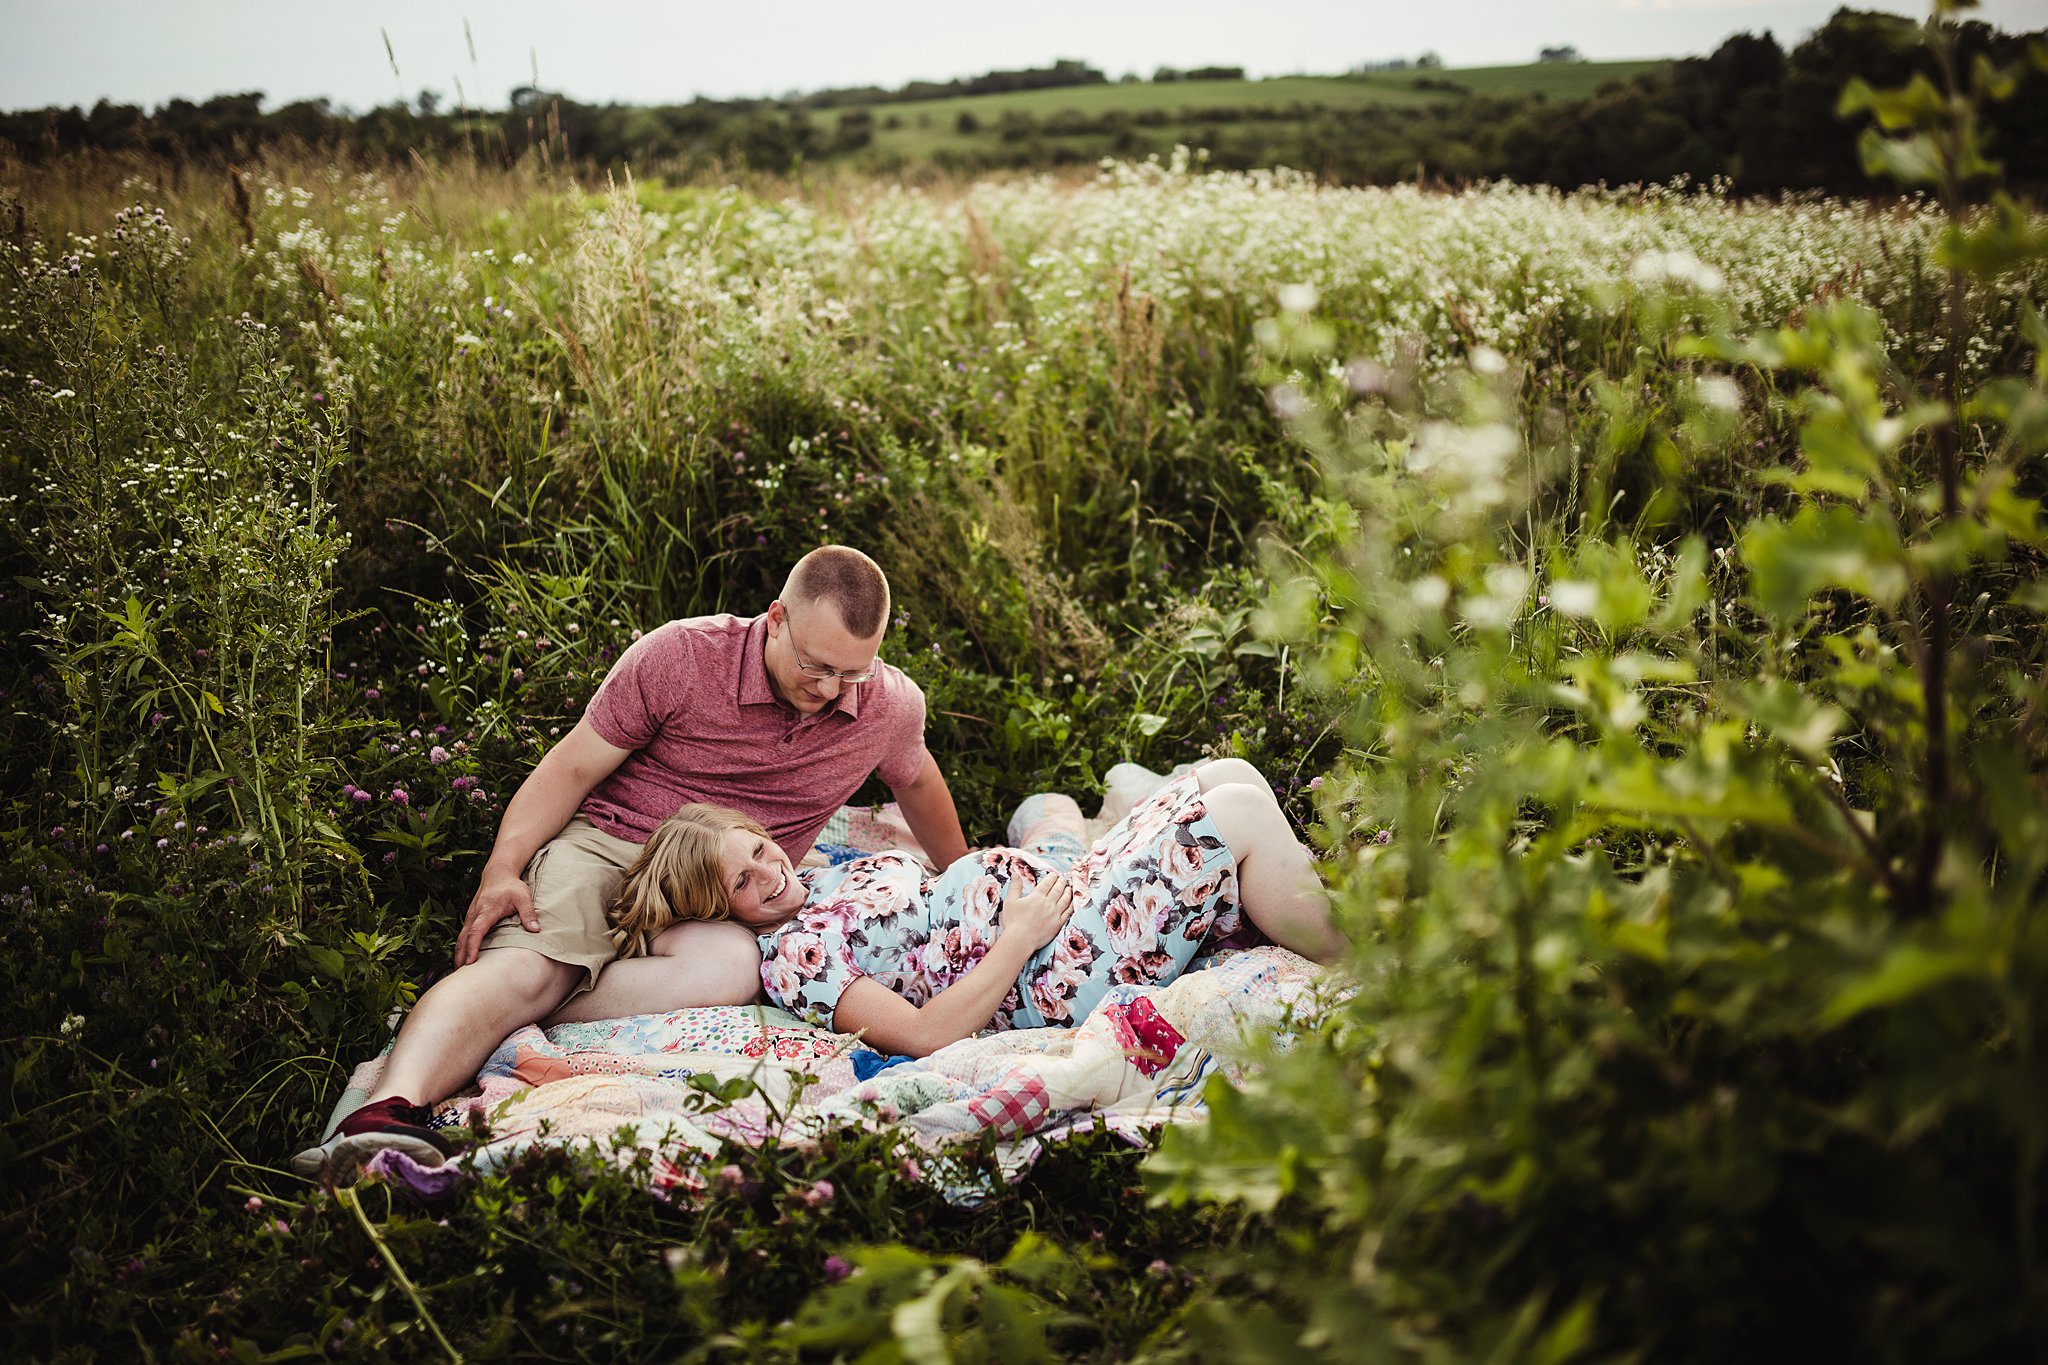 Spring Maternity Session in the Midwest